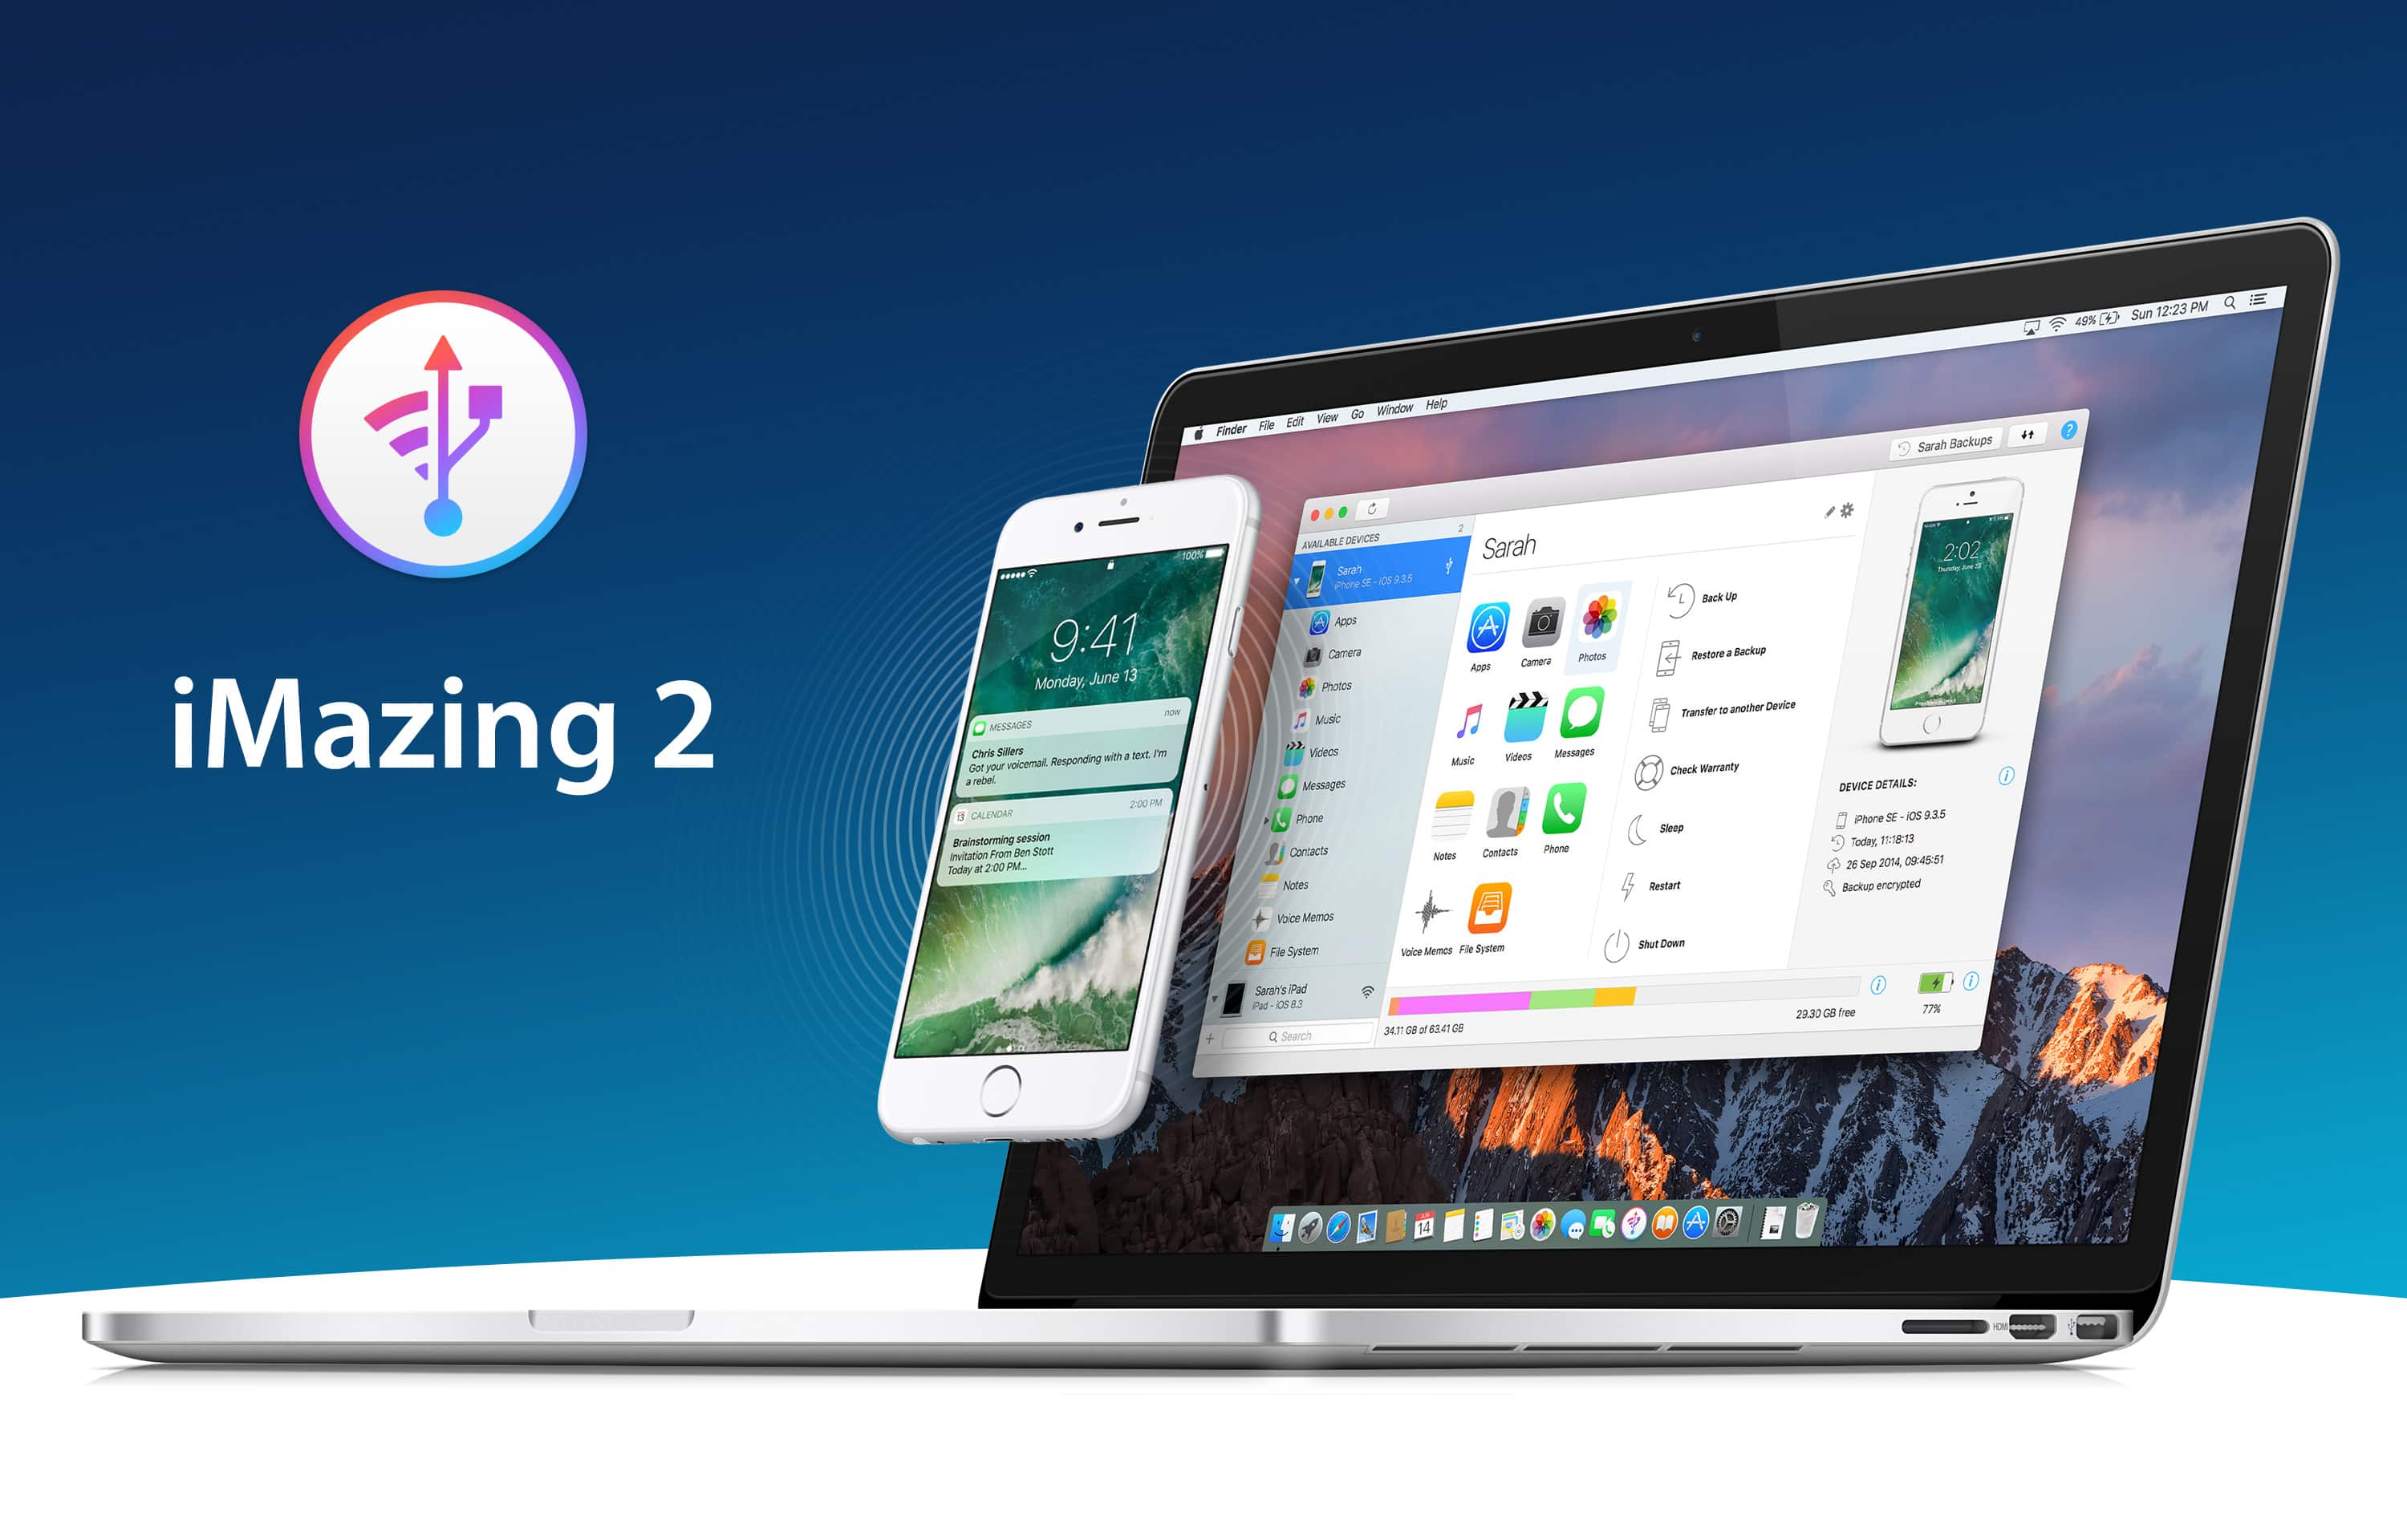 The latest version of iMazing, an iOS device manager for Mac and PC, adds iOS 10.3 compatibility and great new features